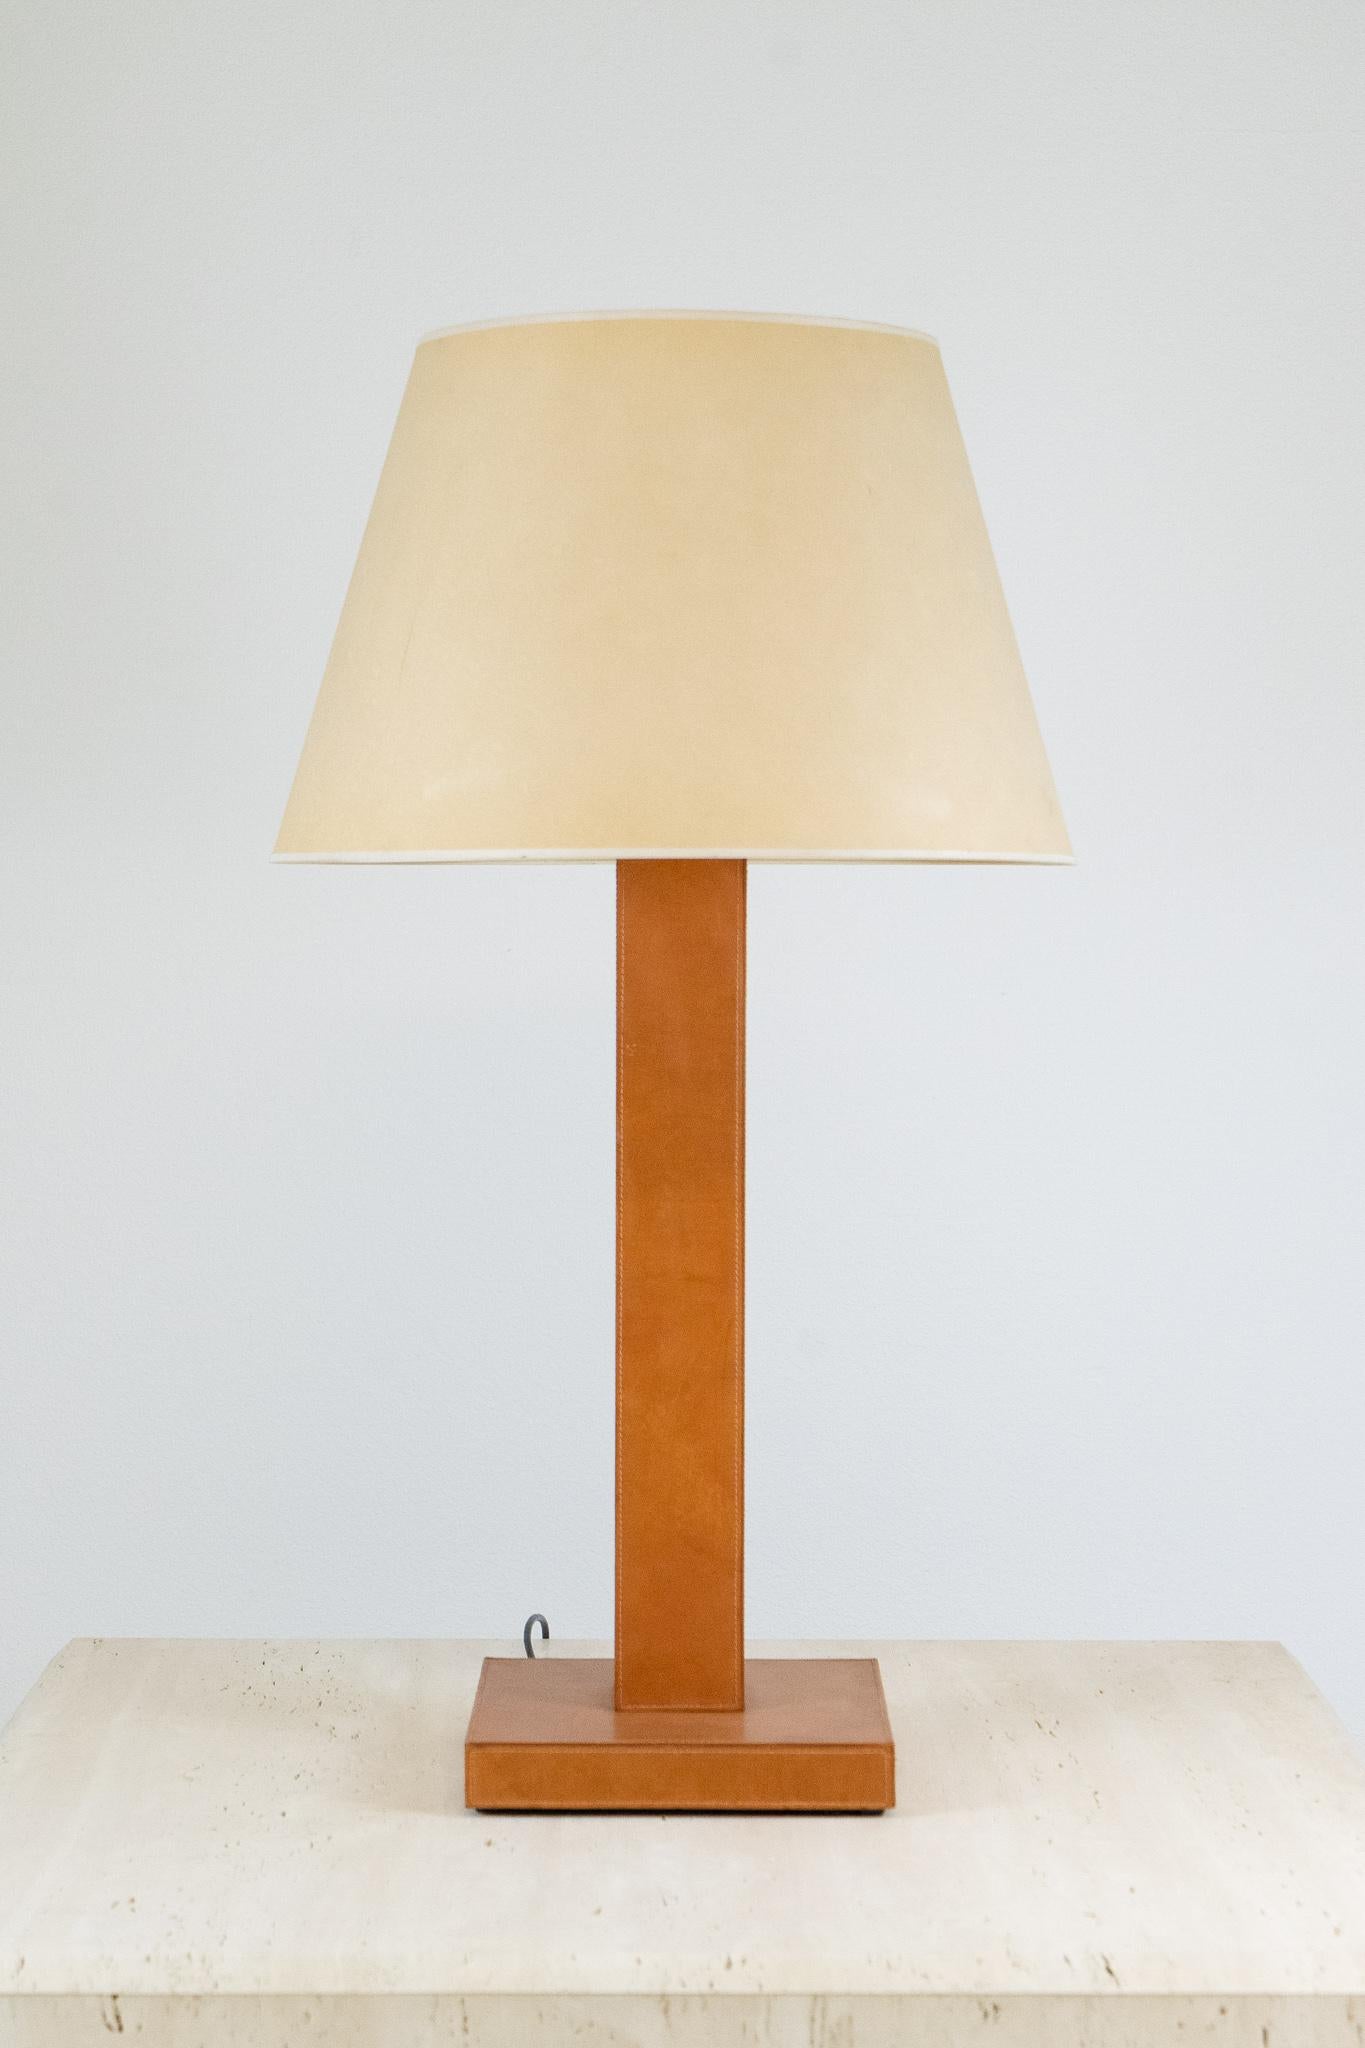 Beautiful large scale vintage (2000) Casa Armani lamp. Stunning lamp, beautiful craftsmanship and rare scale for a designer table lamp. Unique design and scale that would work in any room. This lamp includes original shade, diffuser and dimmer.